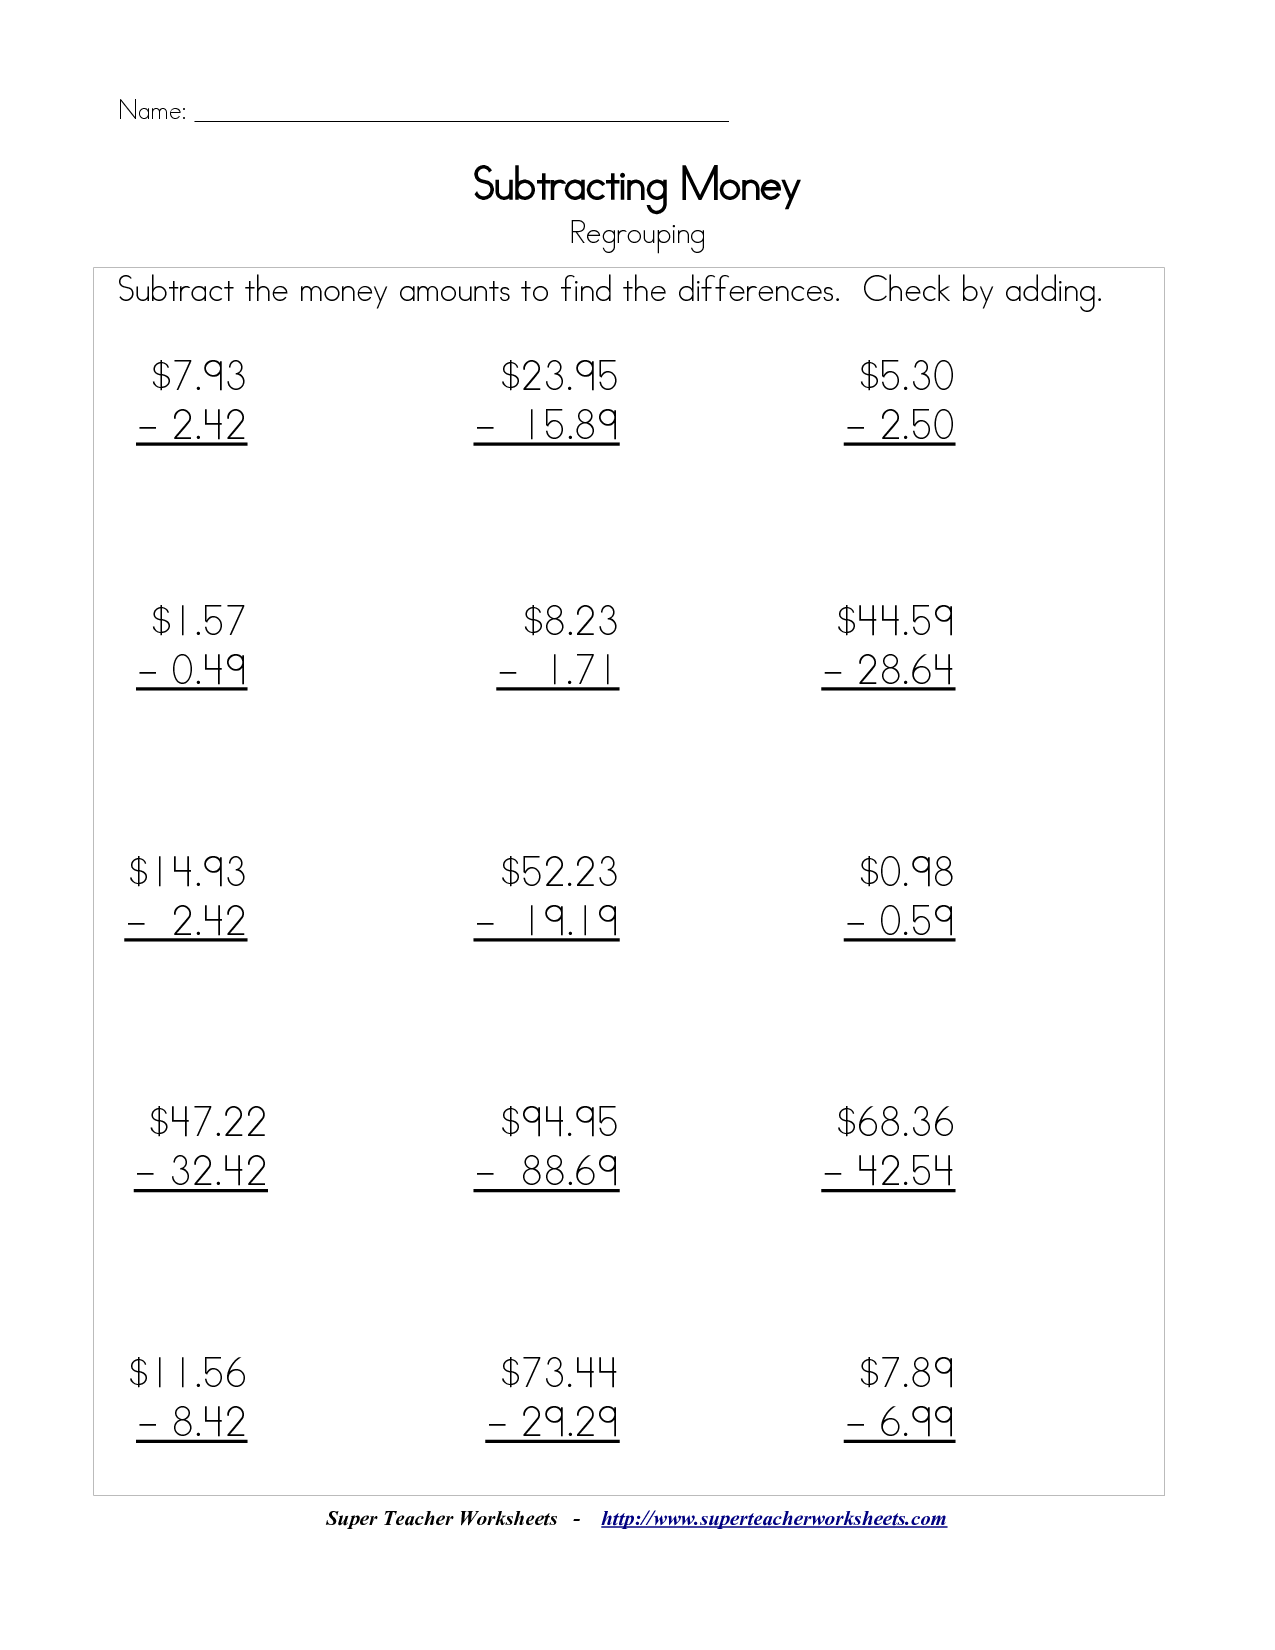 Adding and Subtracting Money Worksheets 2nd Grade Image